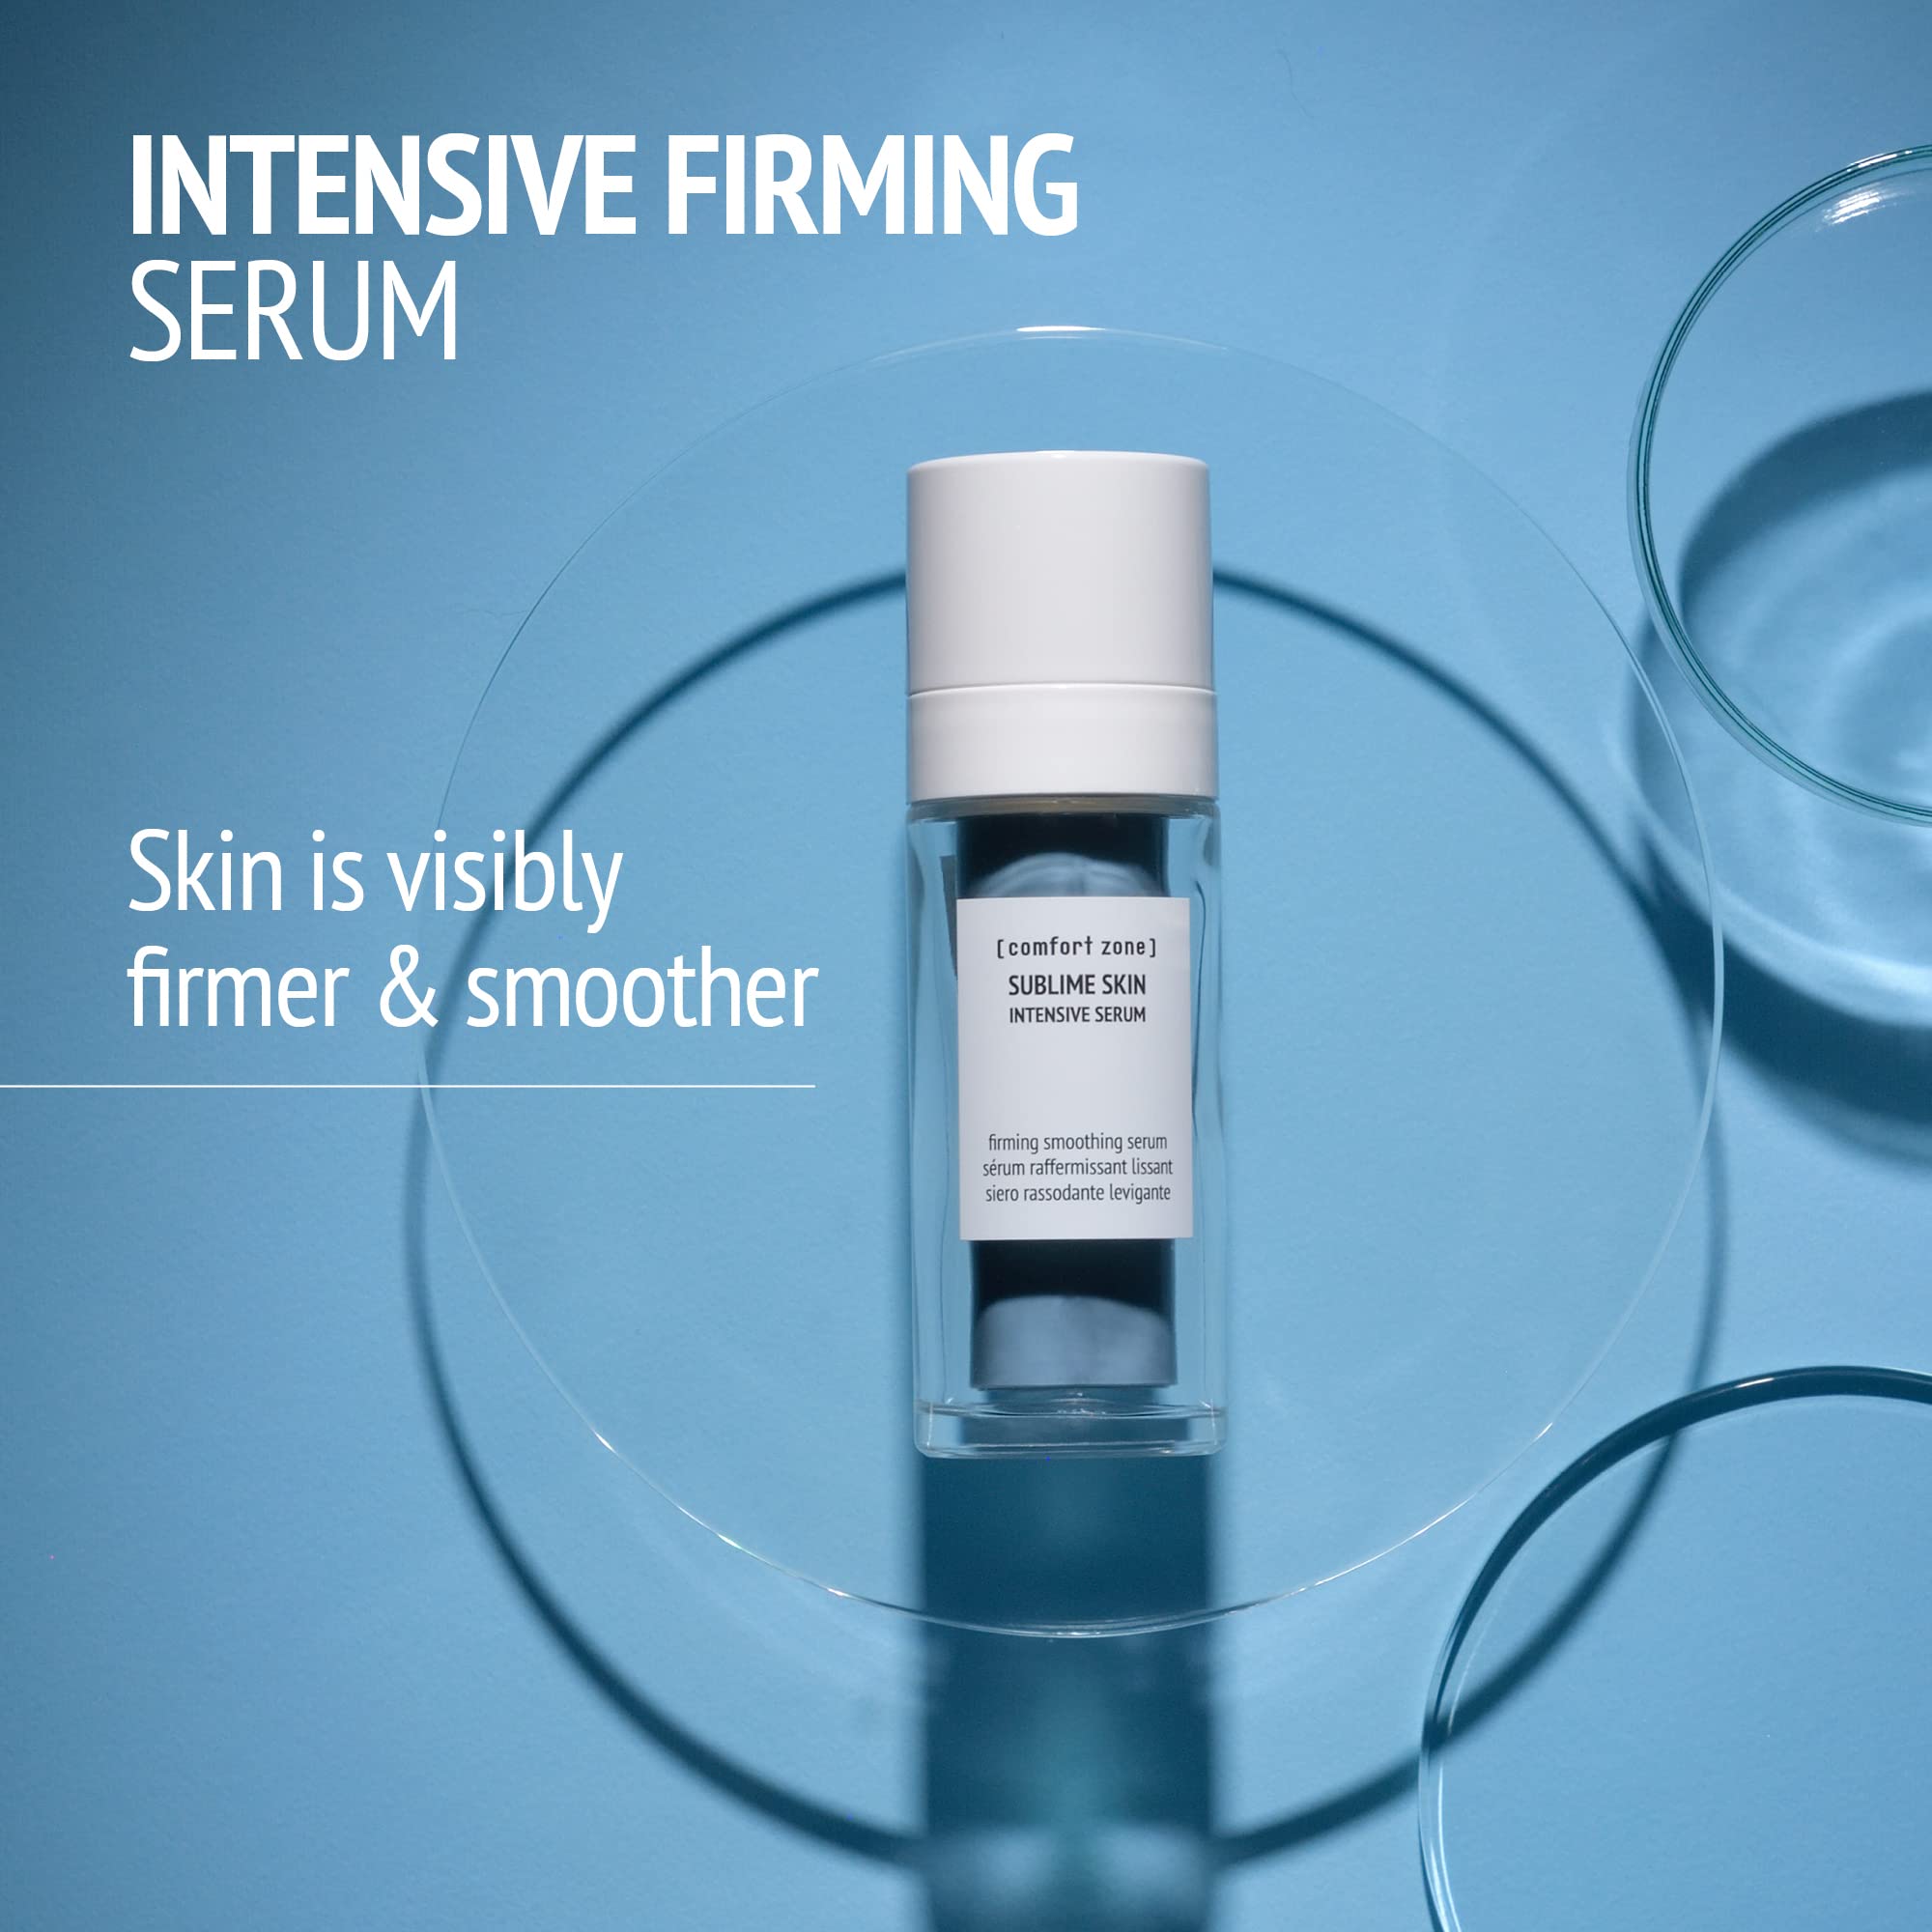 [ Comfort Zone ] Sublime Skin Intensive Serum, Firming And Smoothing Anti-Aging Formula, Wrinkle Reduction And Plumping For All Skin Types